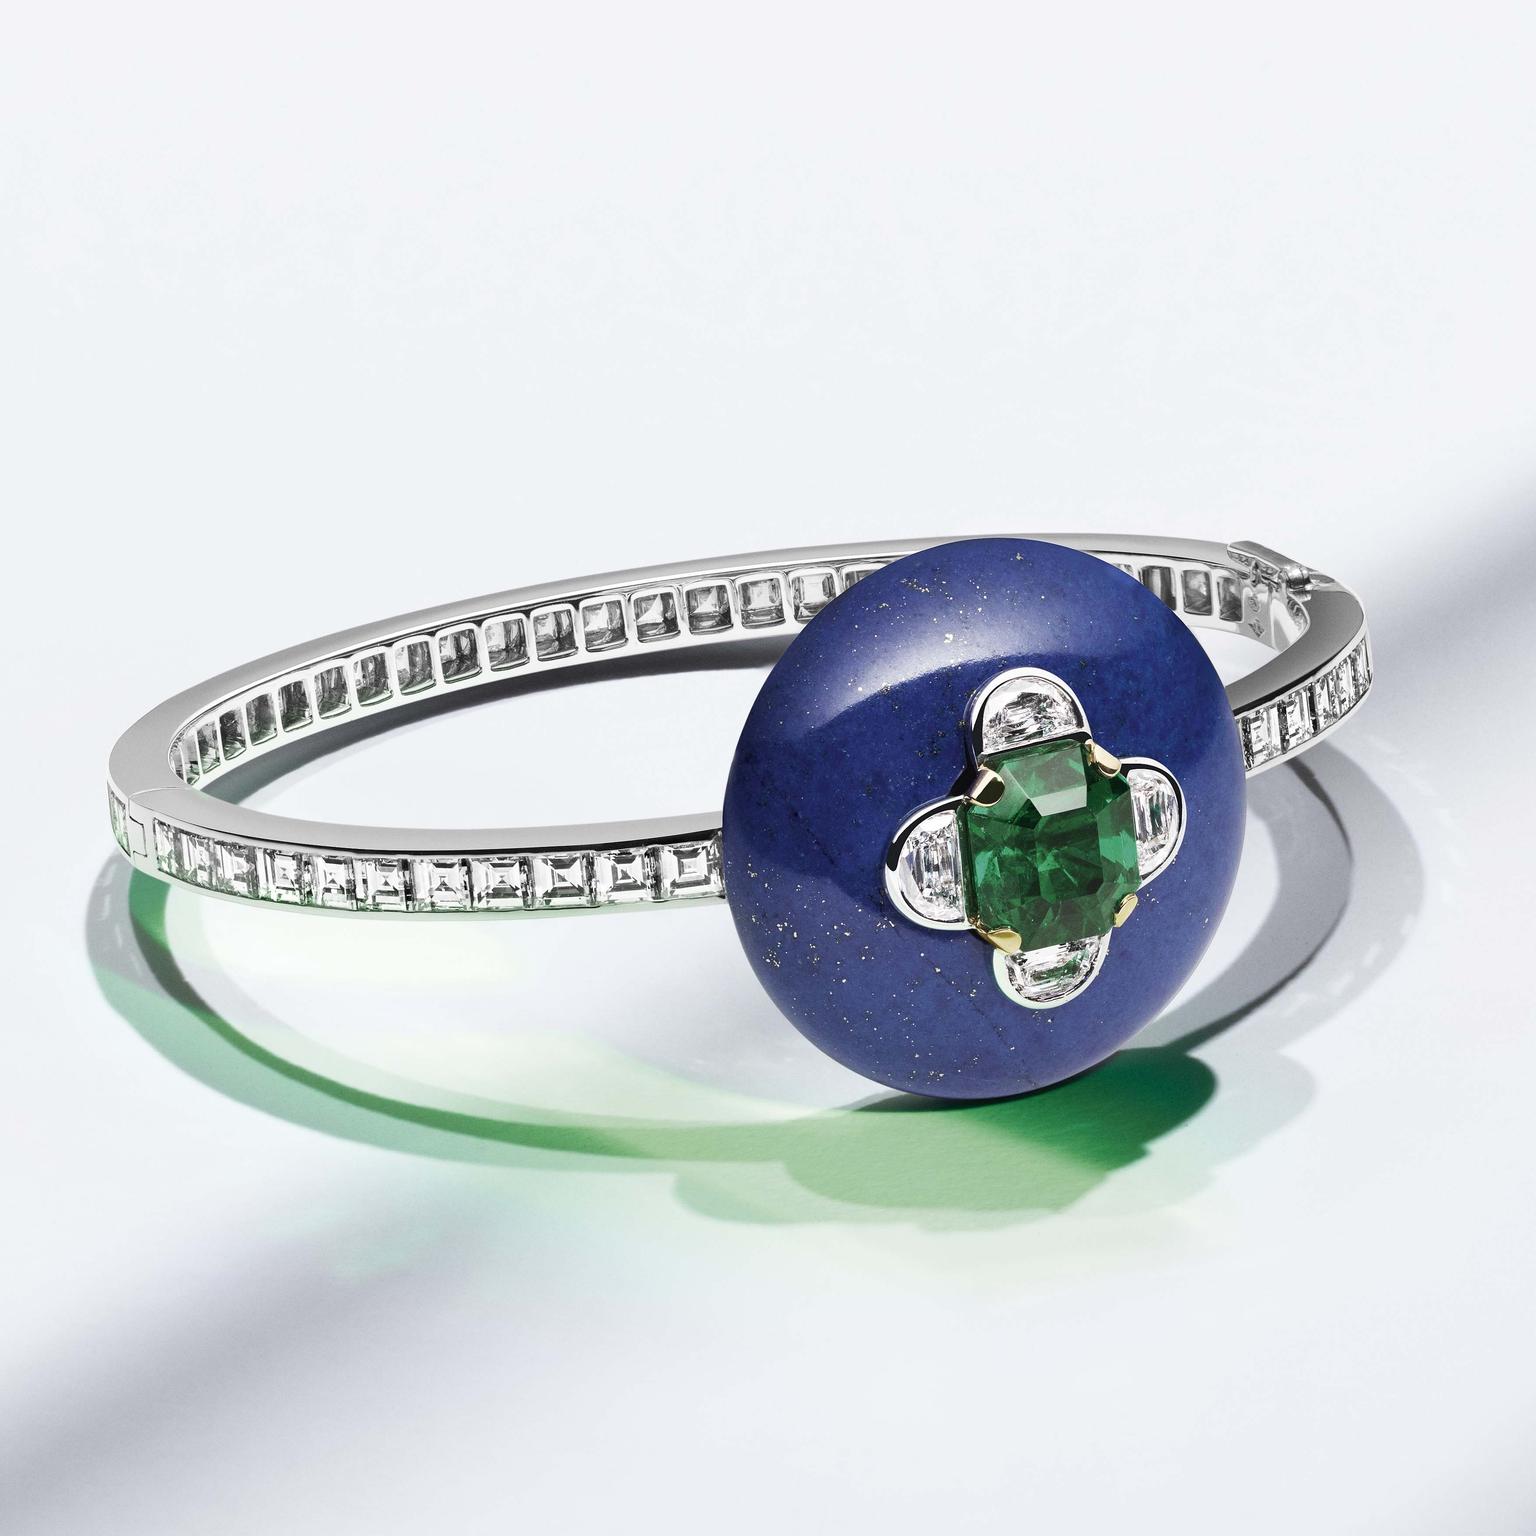 Louis Vuitton Riders of the Knights diamond, emerald and sapphire ring